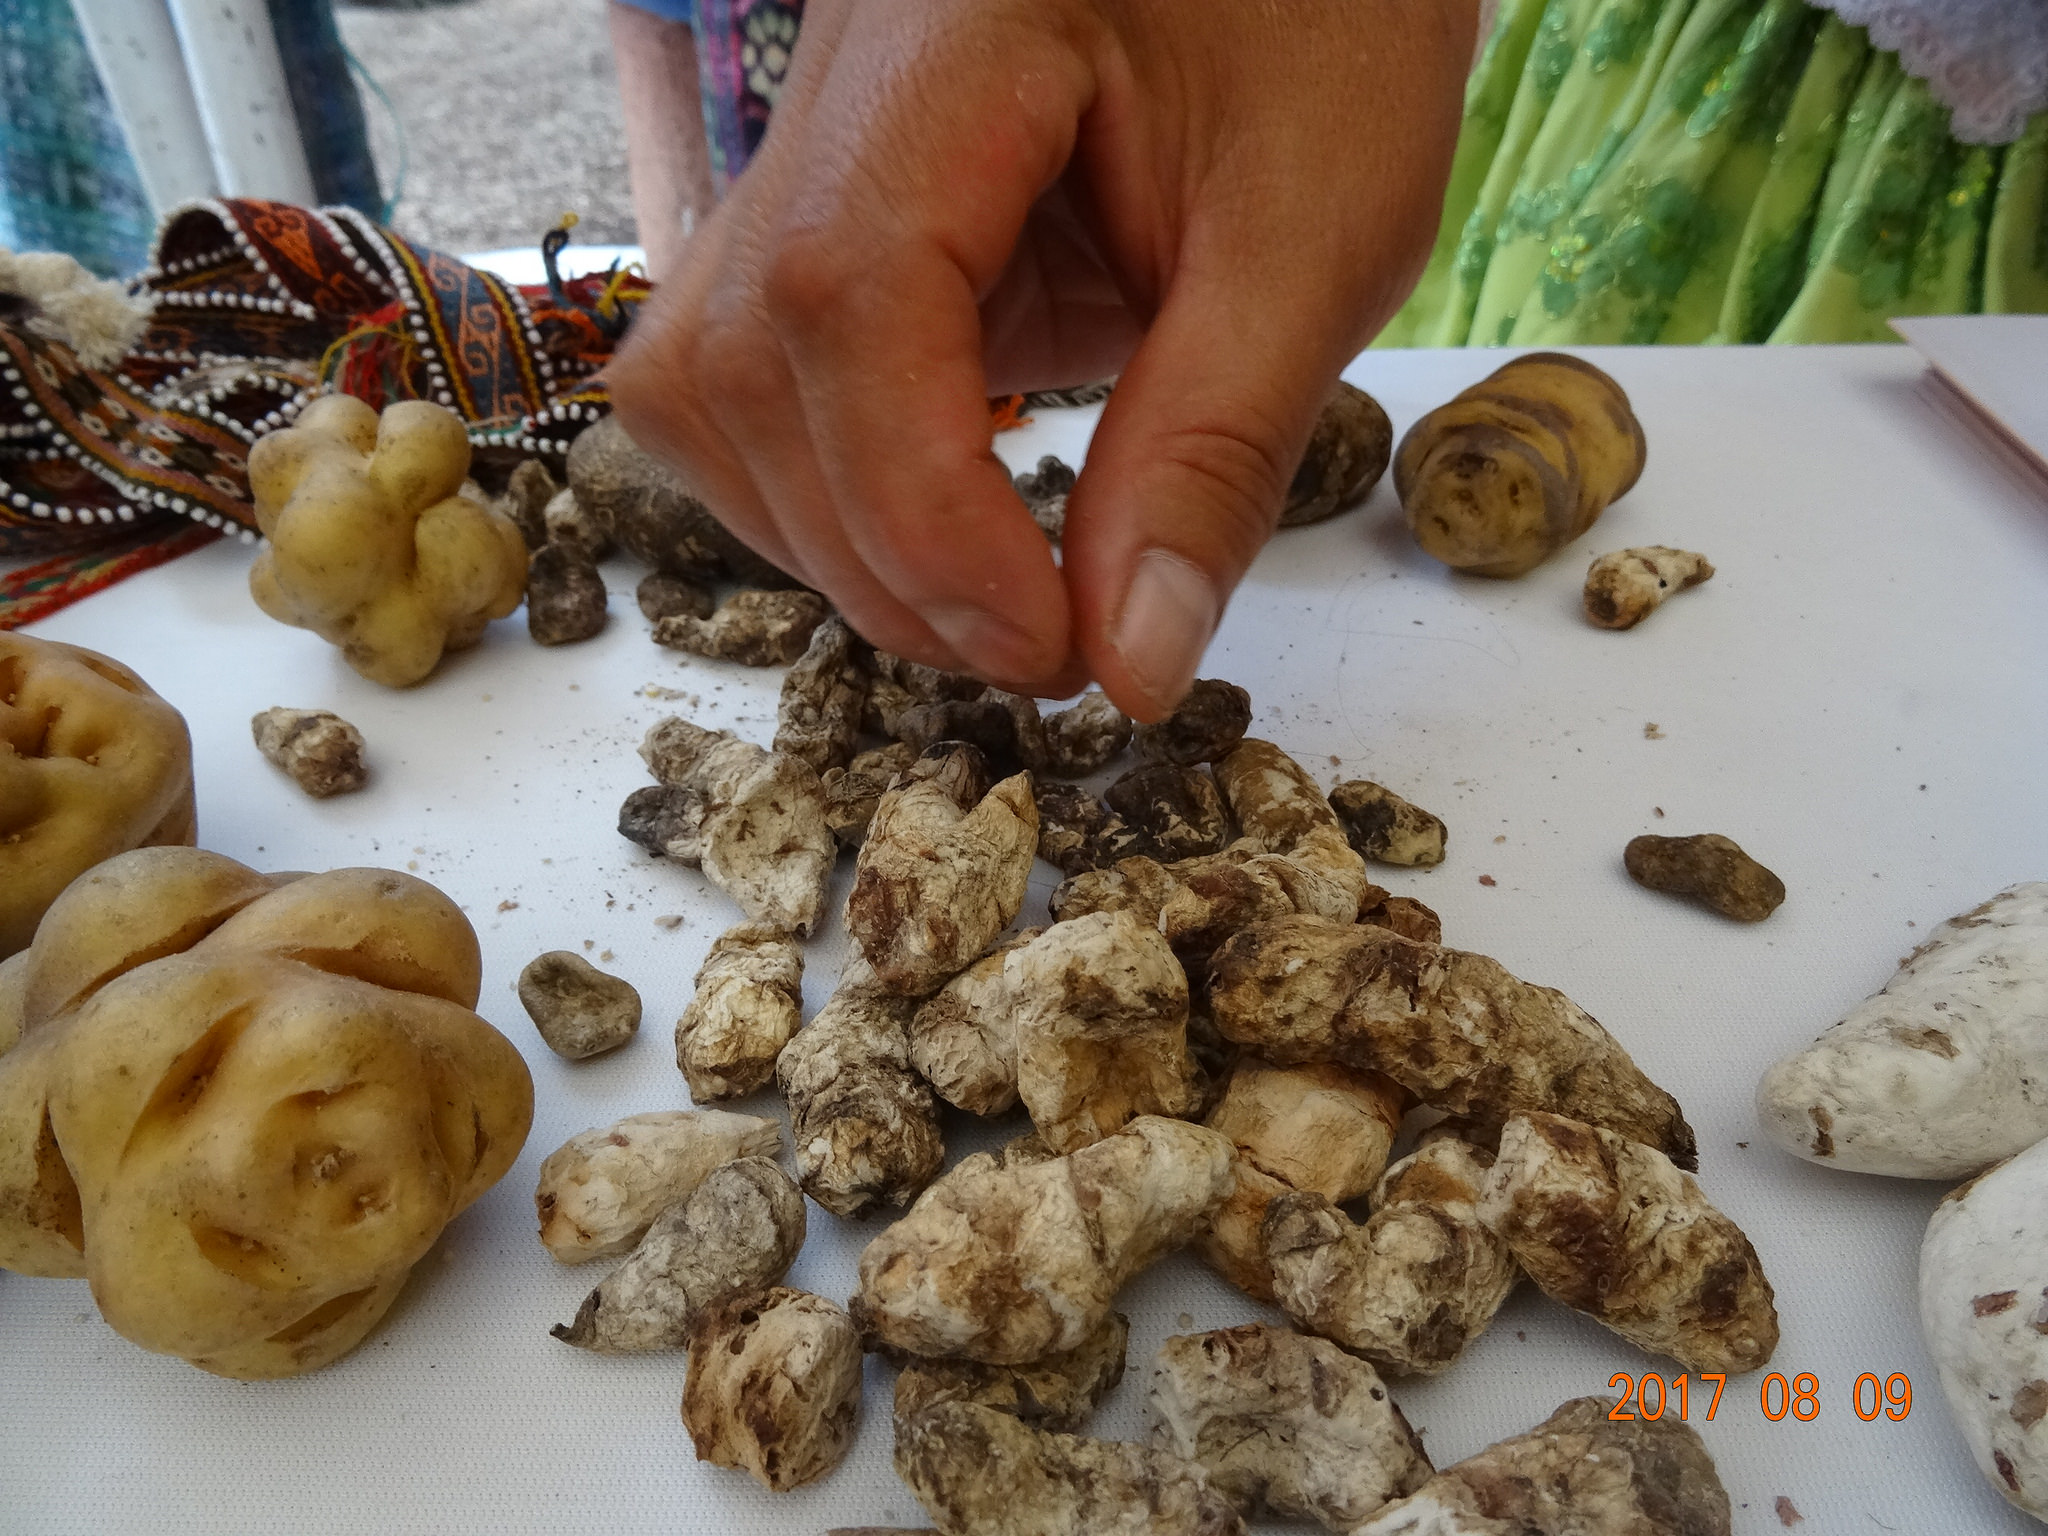 Andean seed potatoes and tubers.